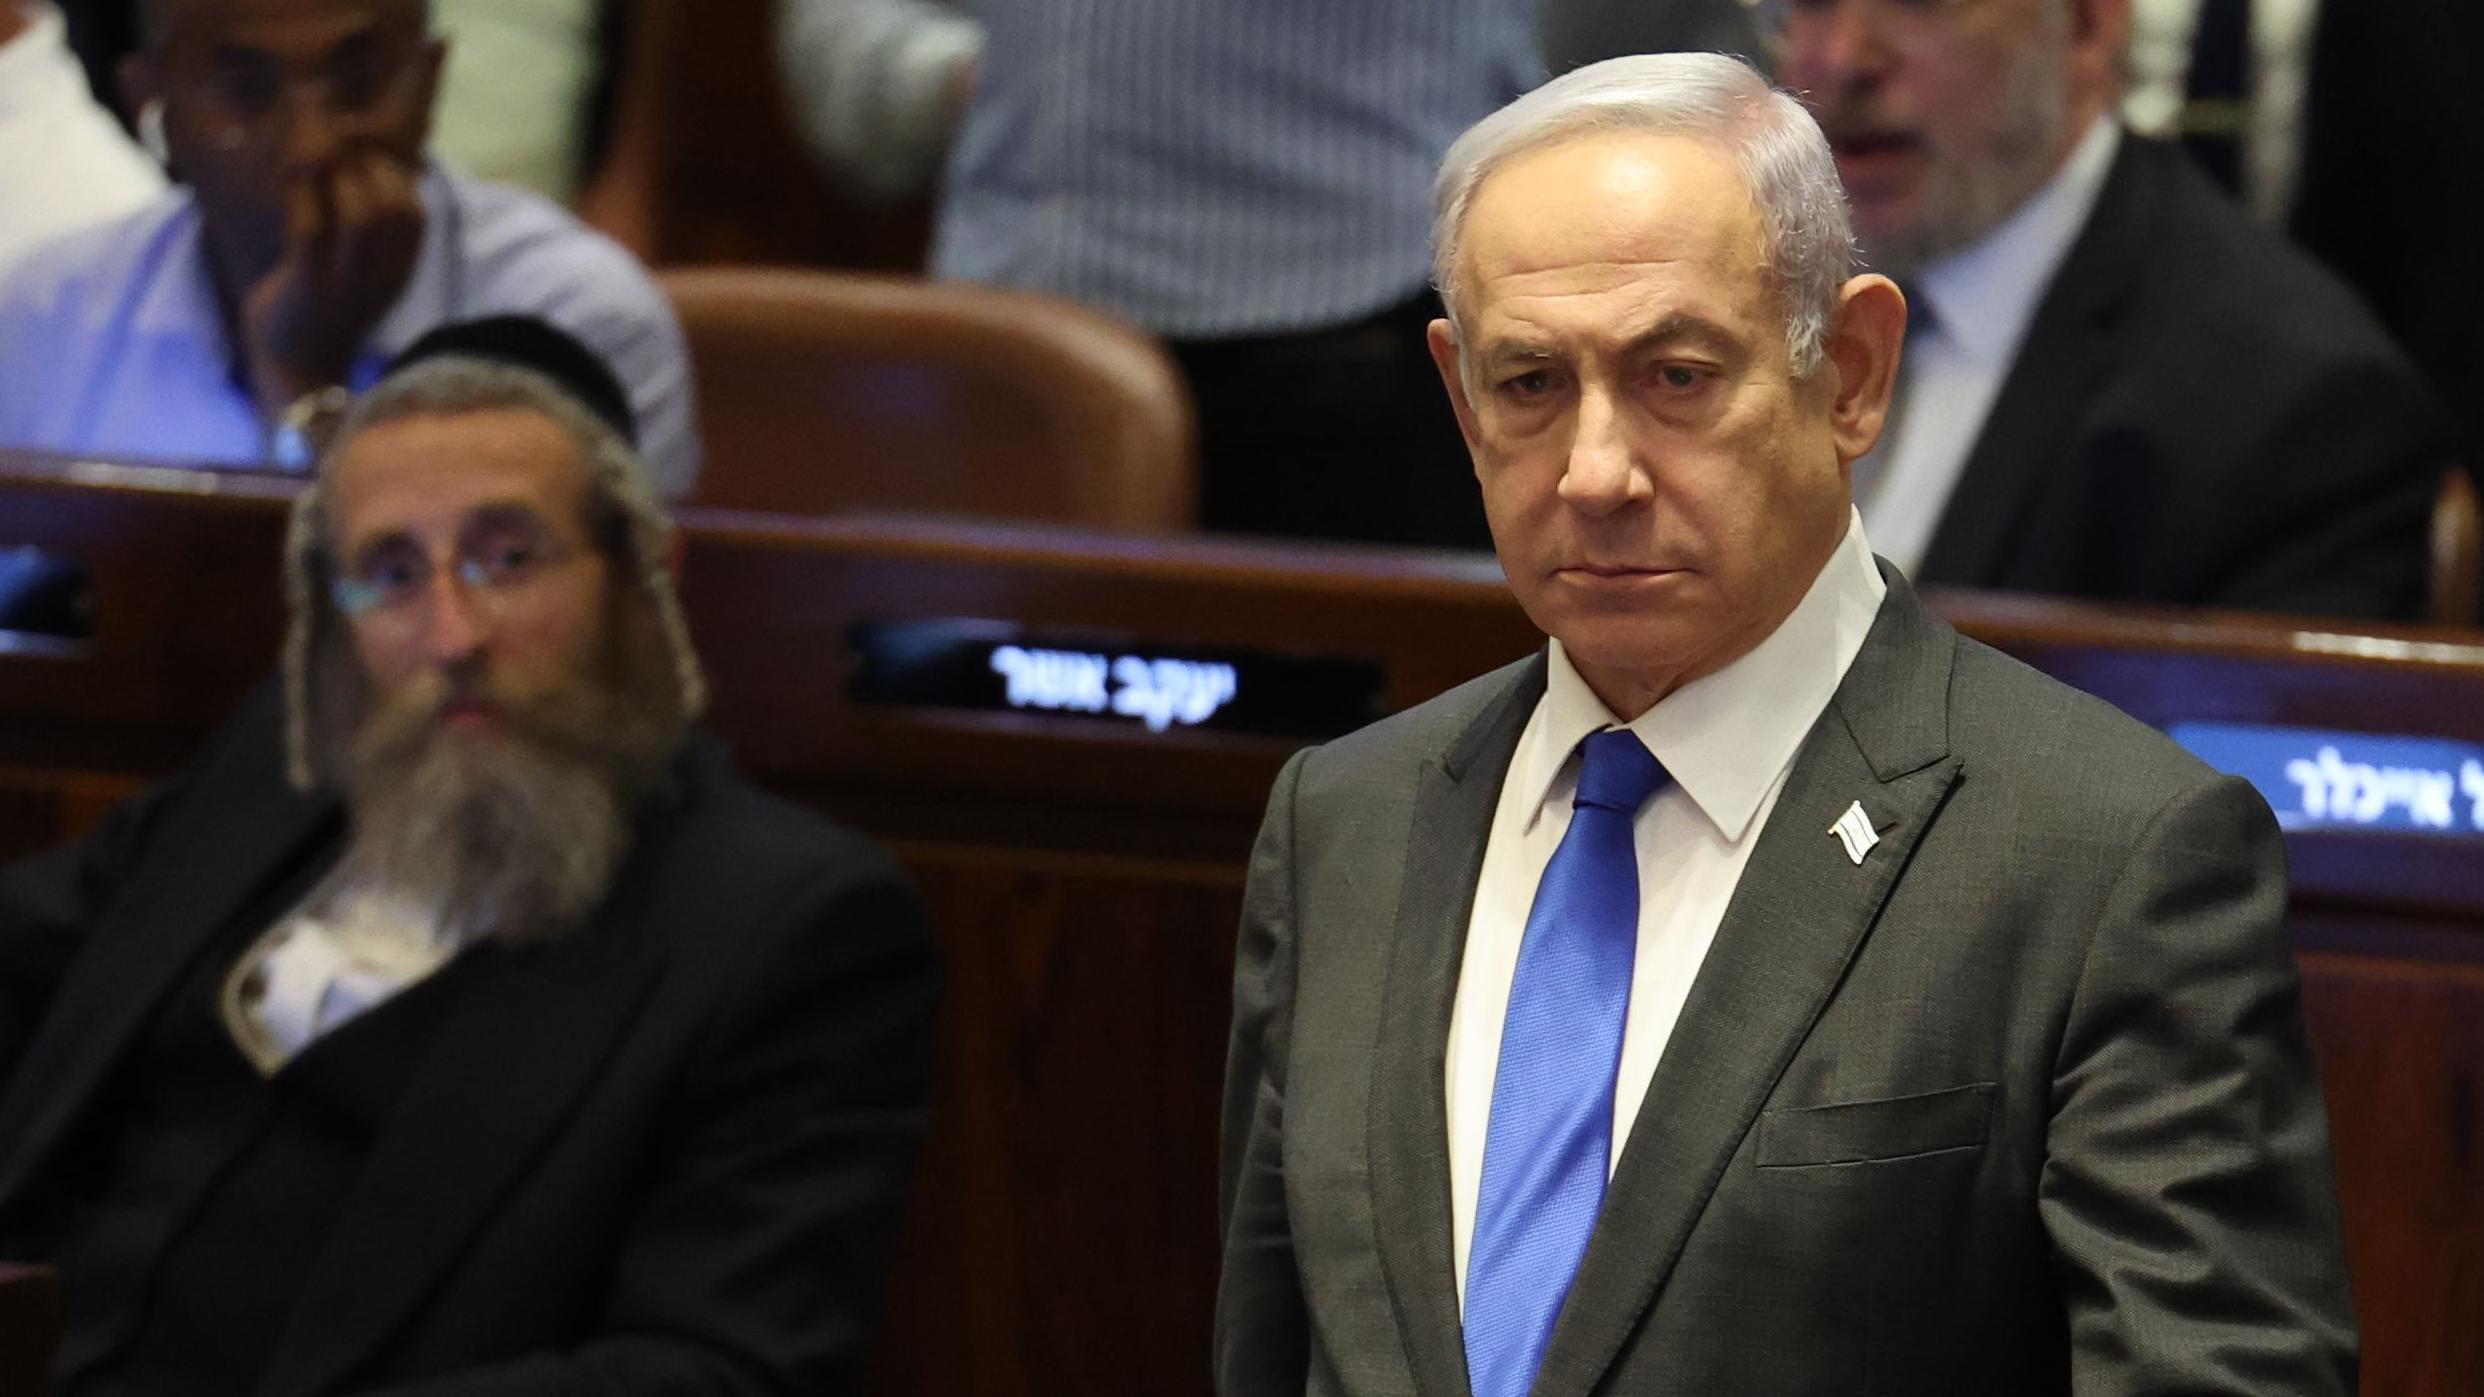 Israel PM Netanyahu Dissolves War Cabinet, Two Key Cabinet Ministers Resign